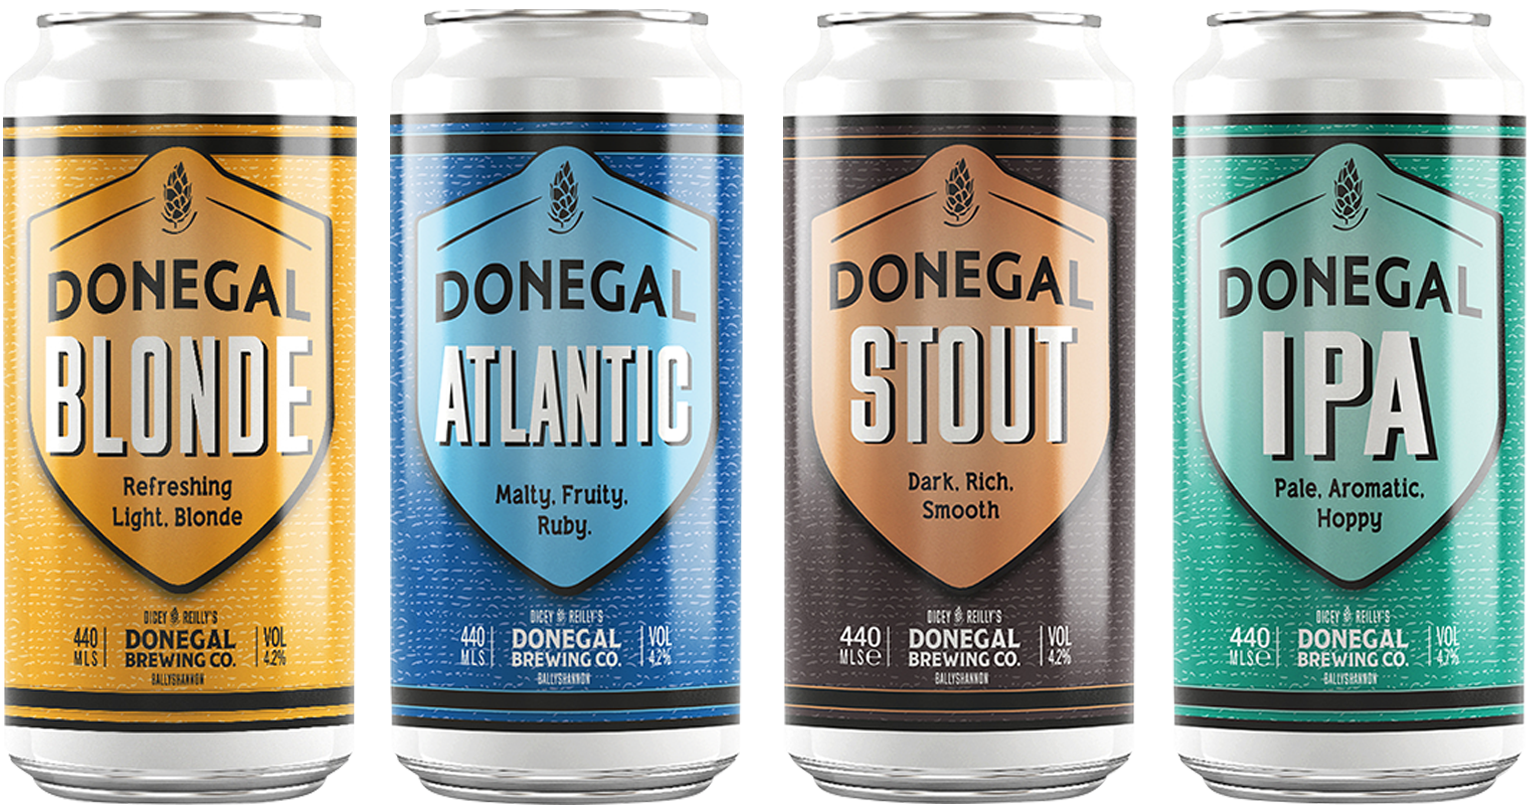 Our Bar Donegal Brewing Company